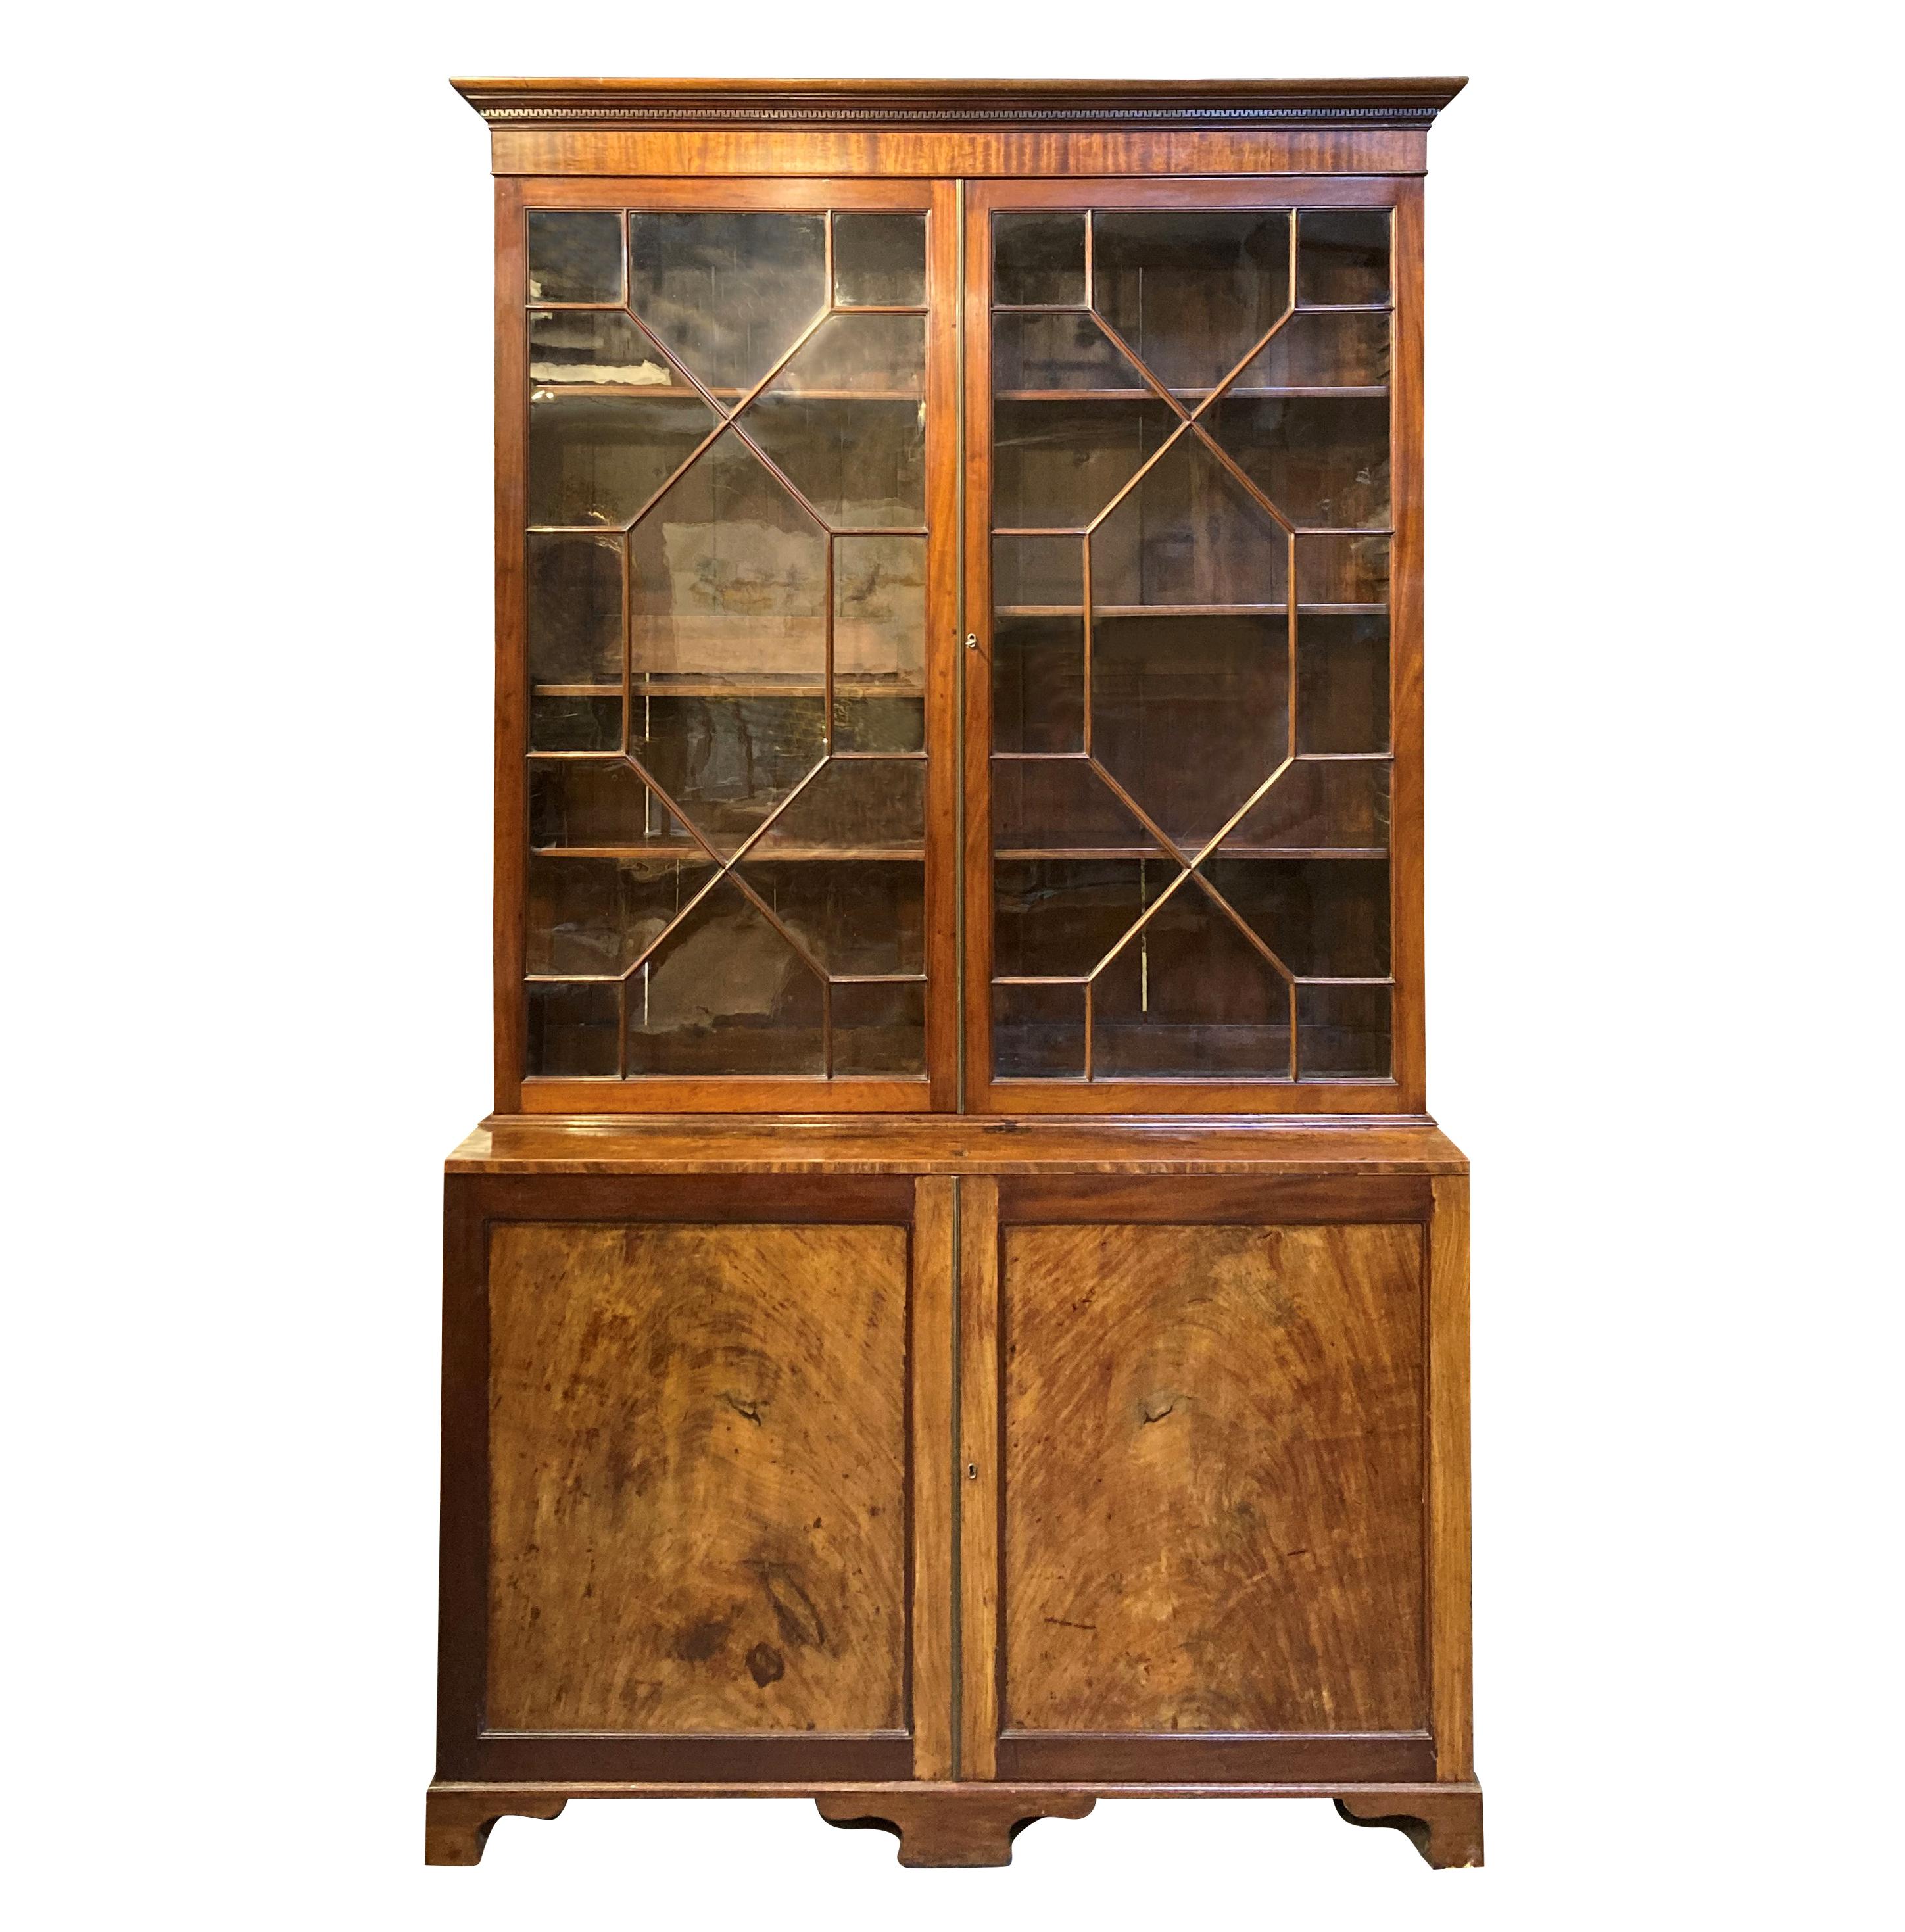 An English George III mahogany bookcase of large proportions. The Greek key and ogee pediment above geometric astral glazed doors (note there are five historic cracks) enclosing adjustable shelving. The cupboards below are unusually deep, along with